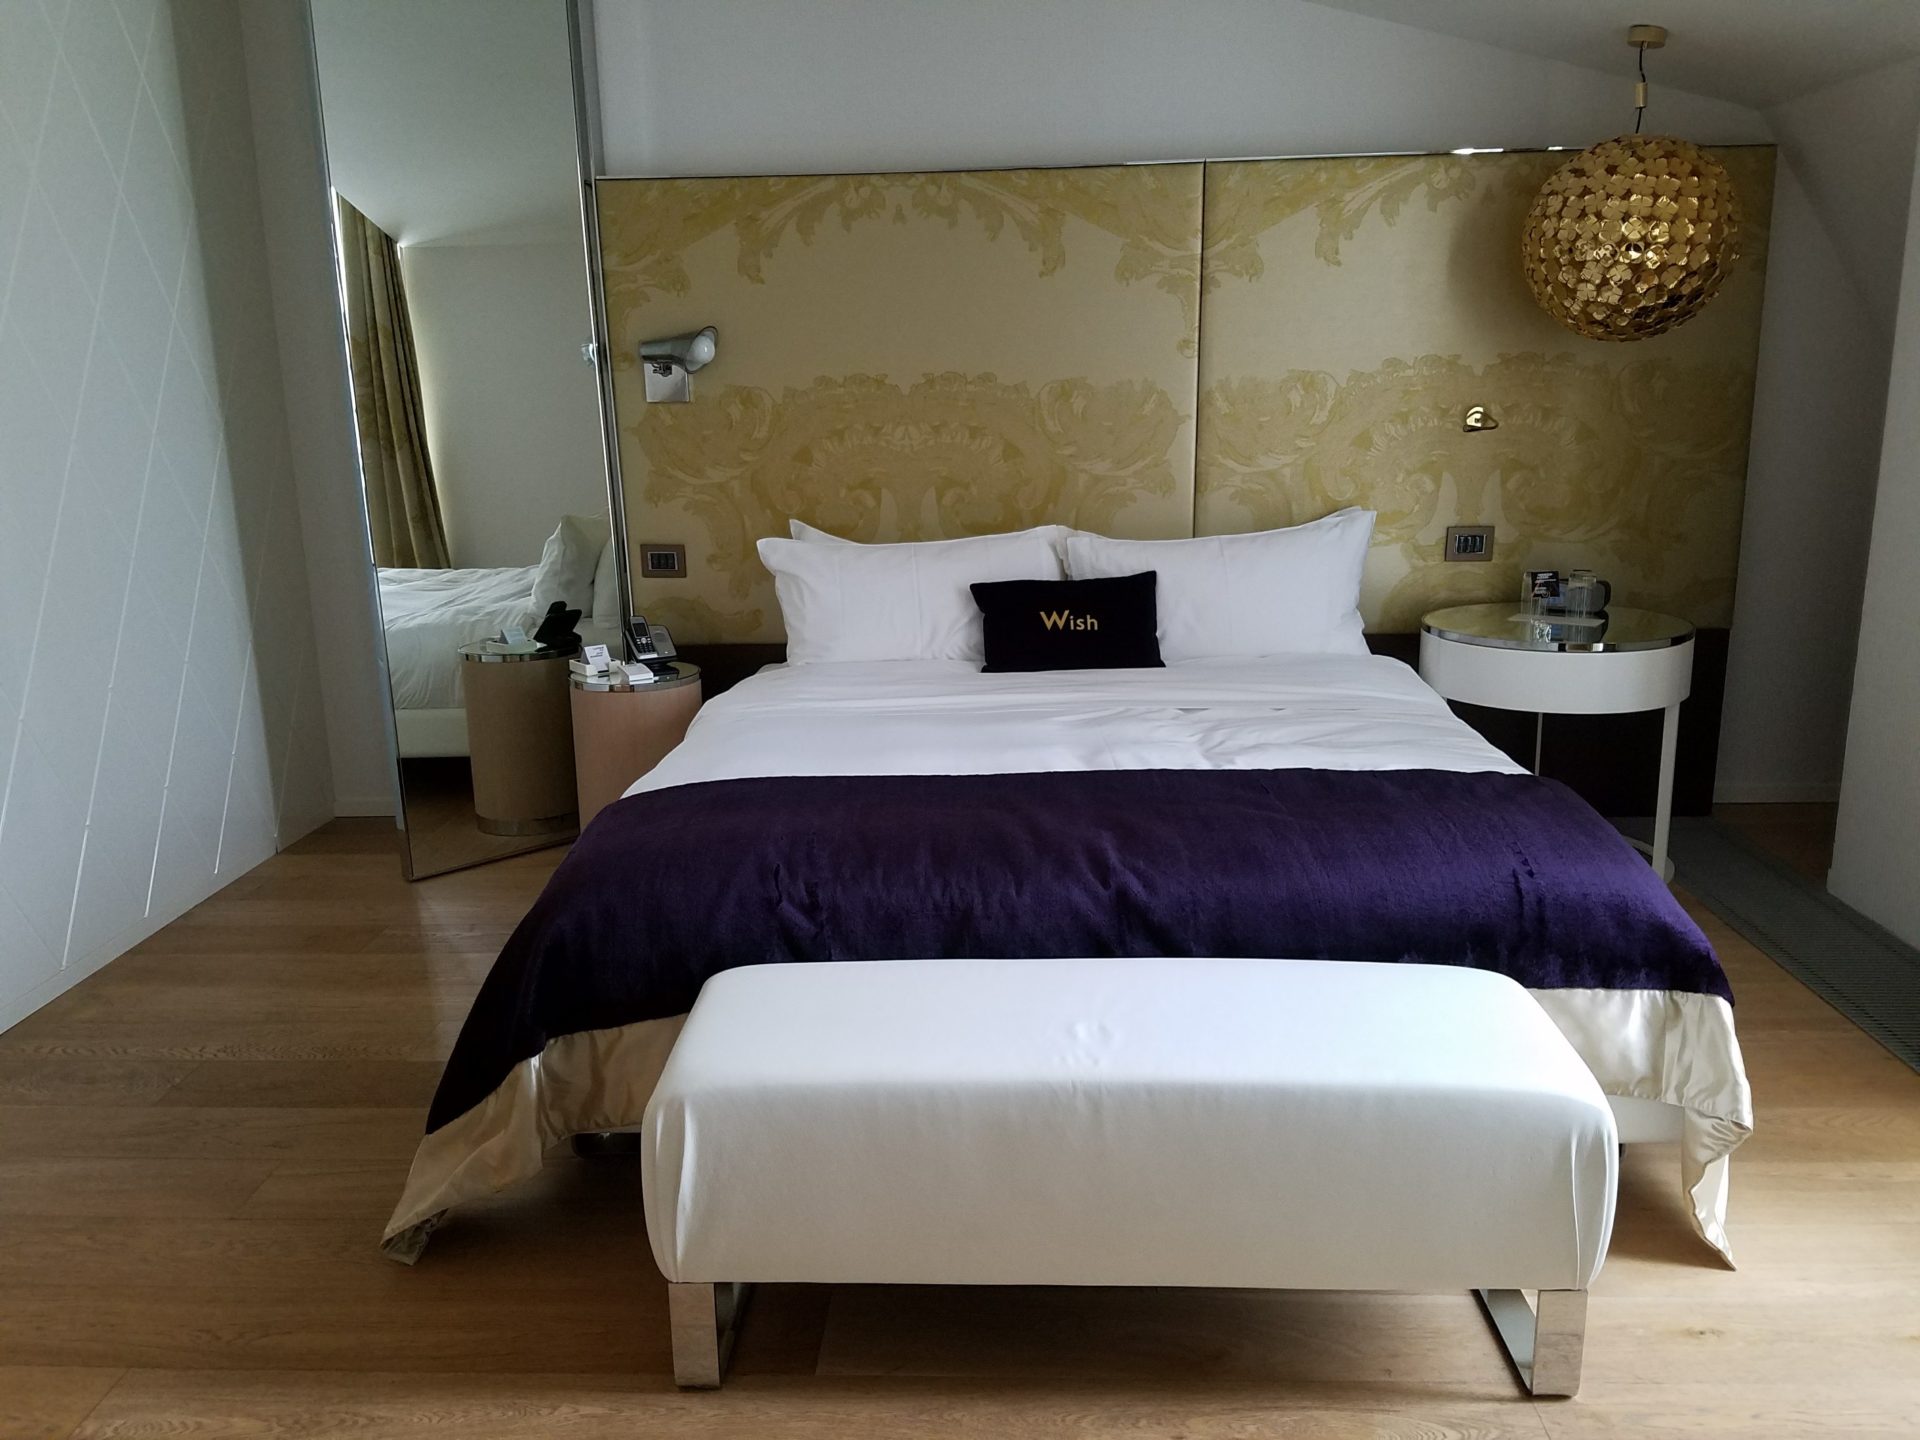 a bed with a mirror and a mirror above it